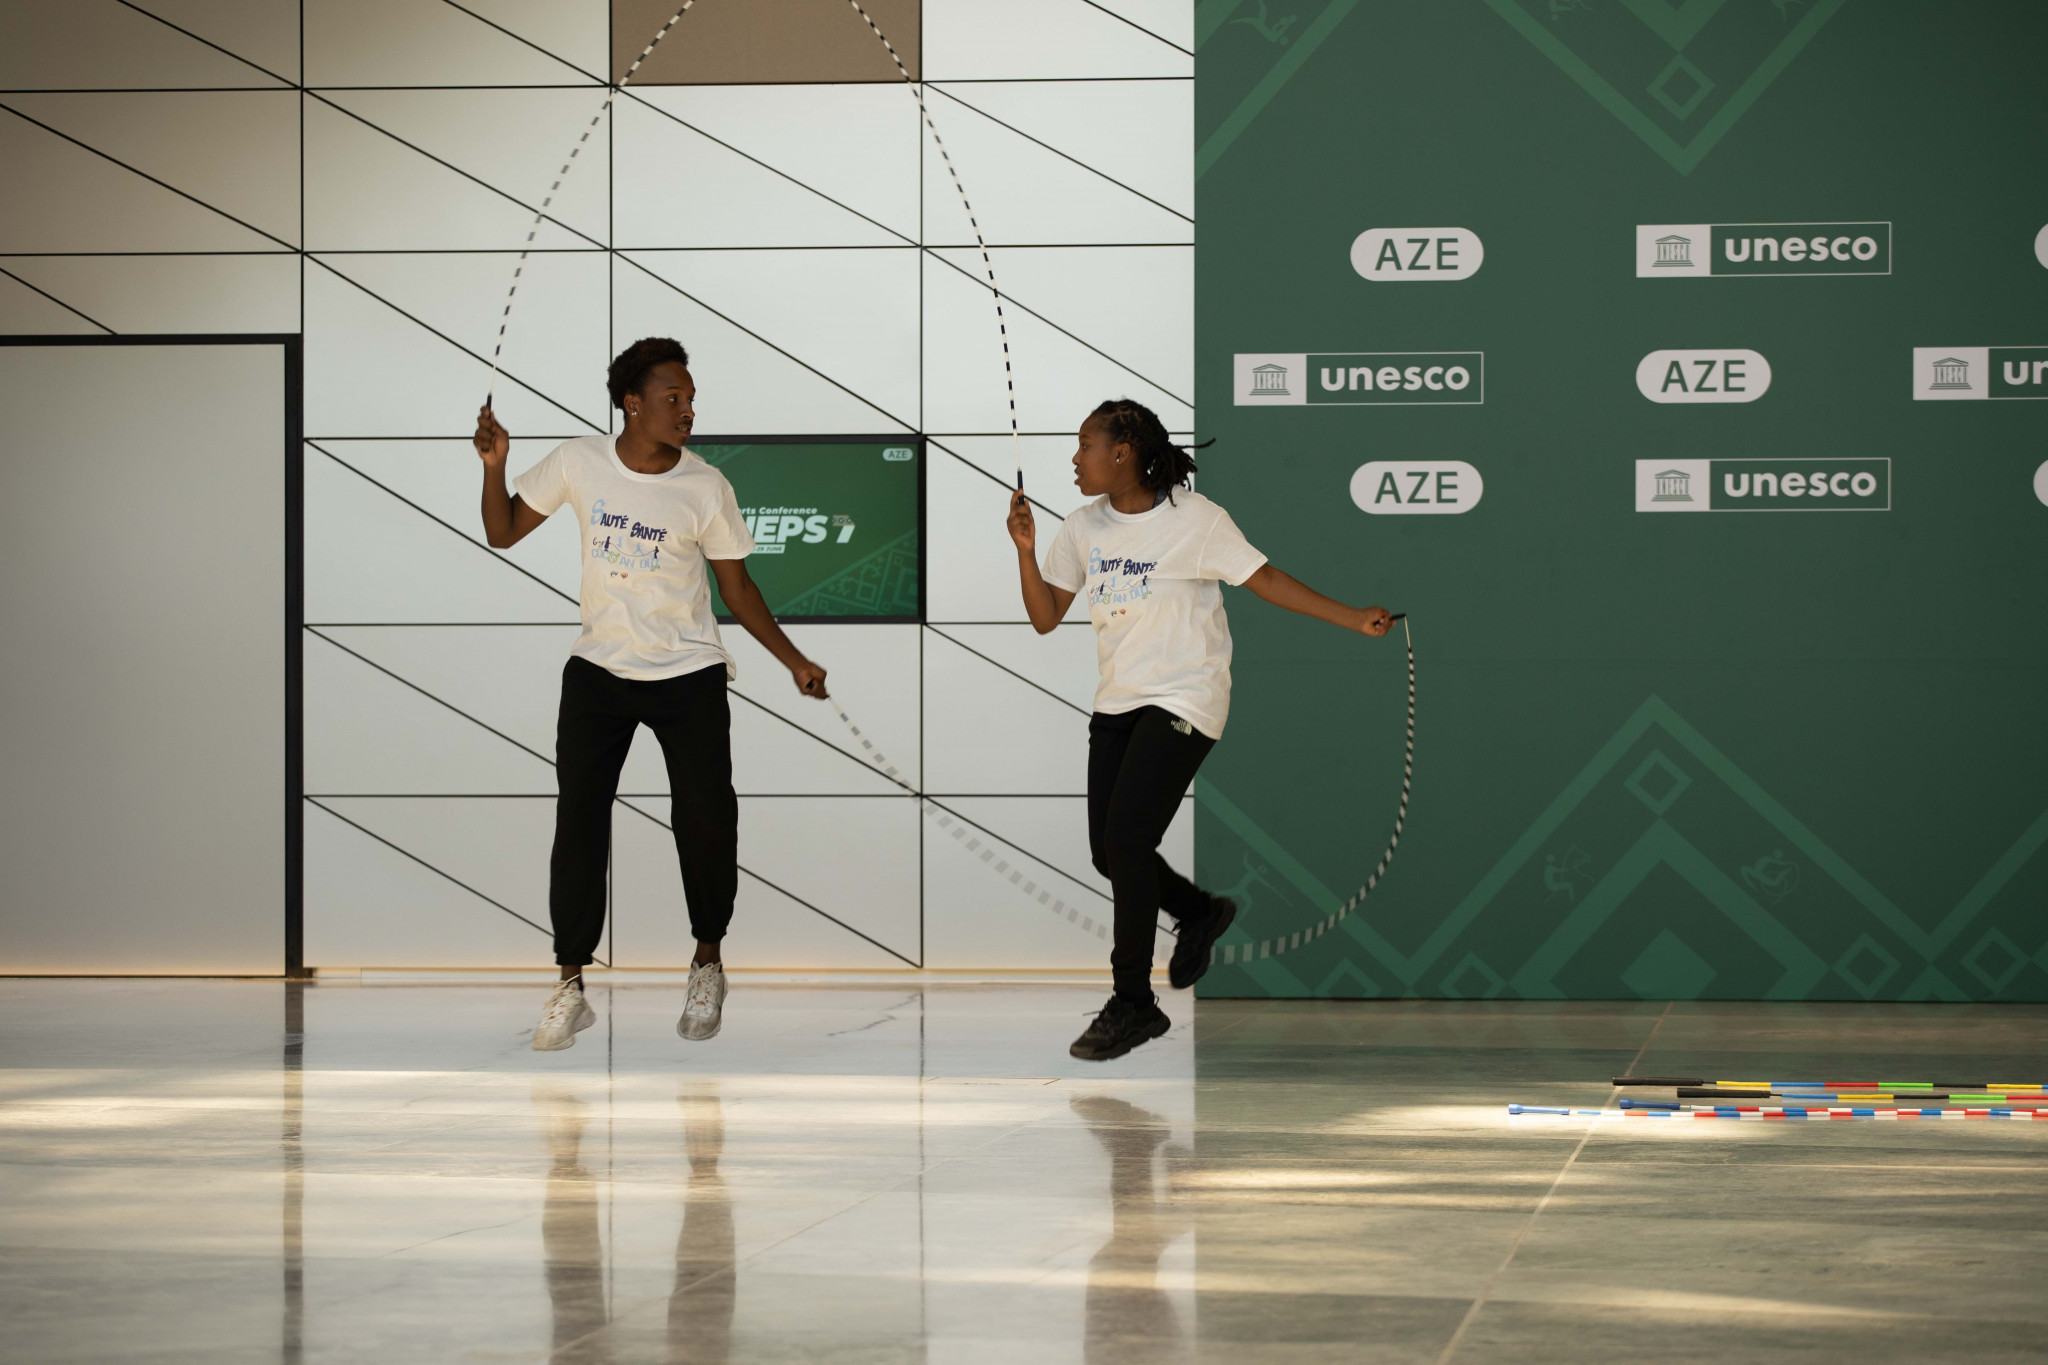 People got the chance to take part in a 30-minute skipping rope challenge to keep active during the break ©MINEPS VII